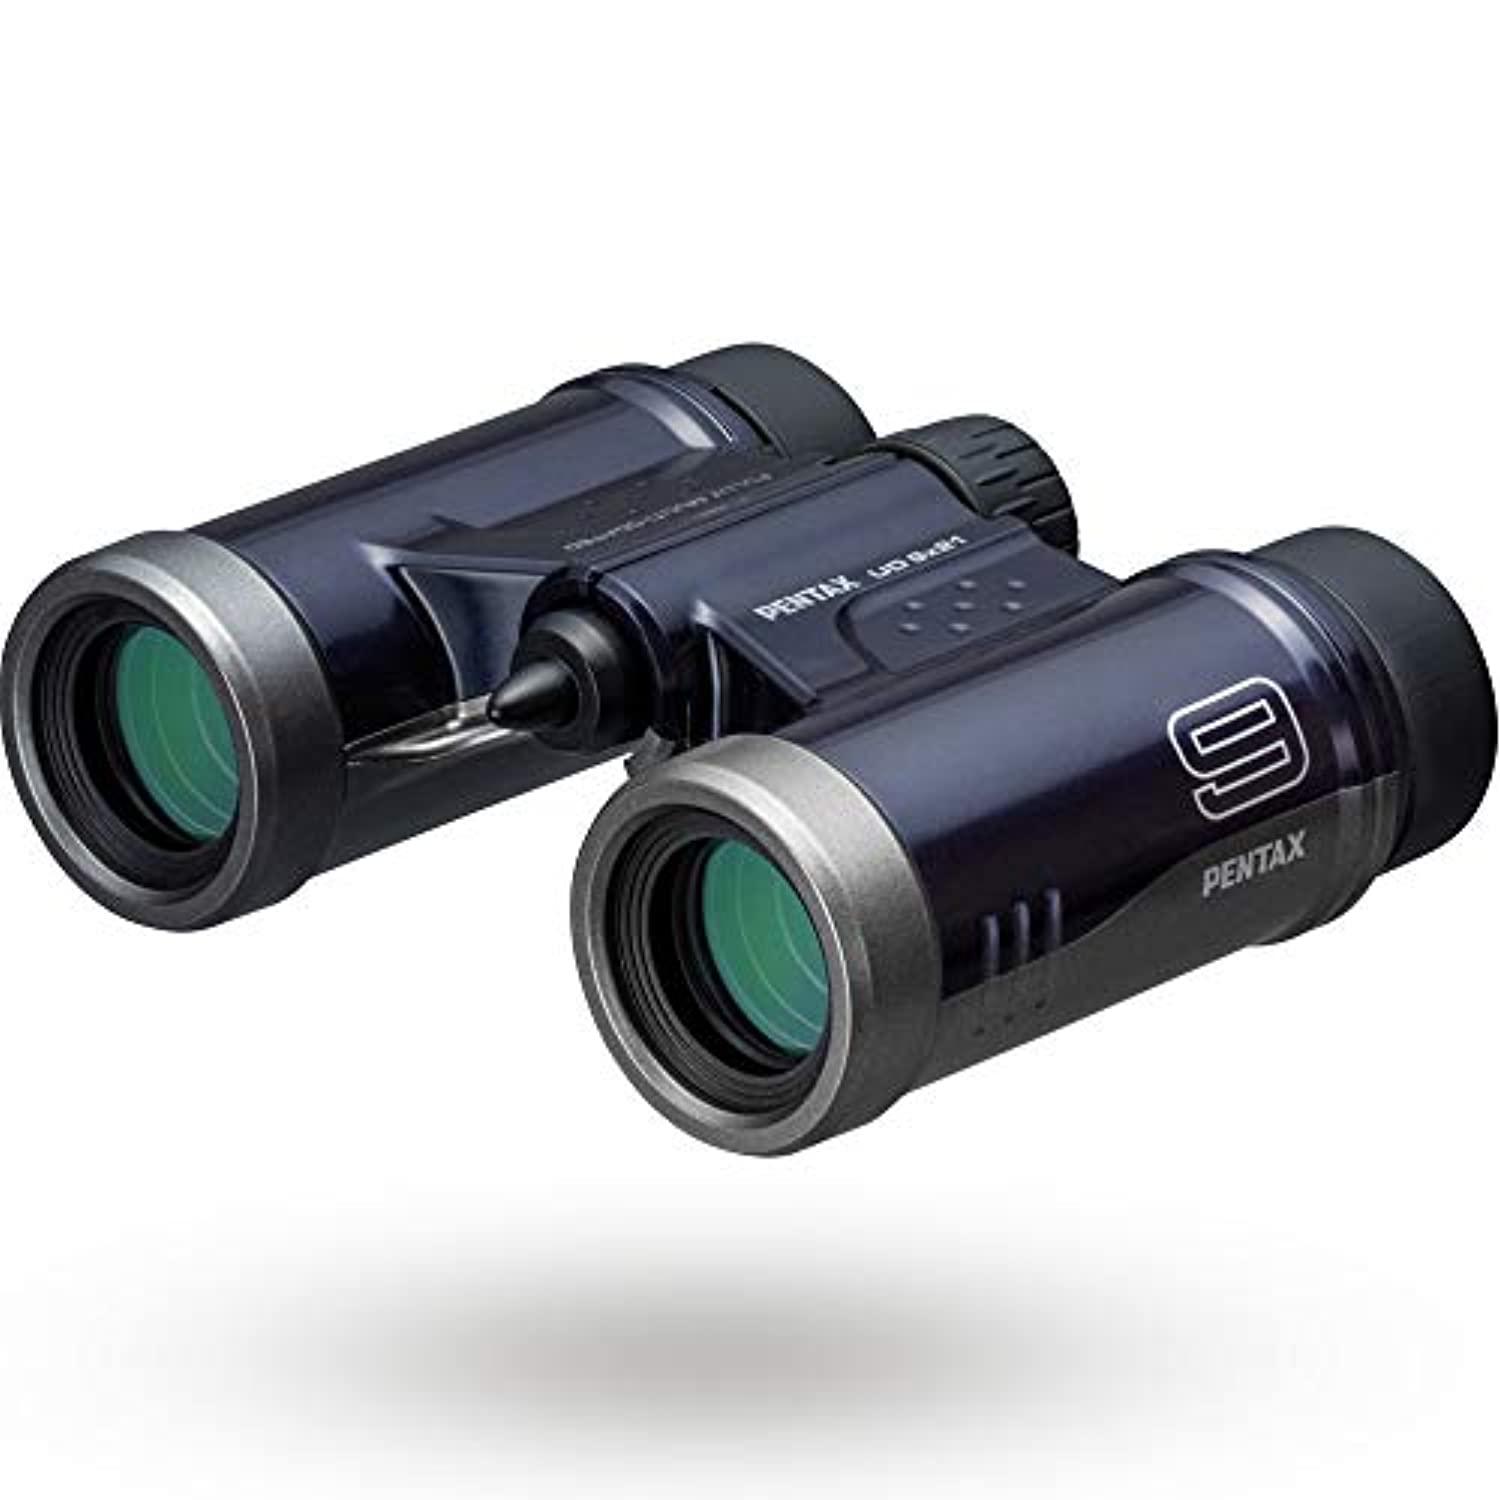 pentax binoculars ud 9x21 - navy. a bright and clear field of view, lightweight body with roof prism, fully multi-coated opti